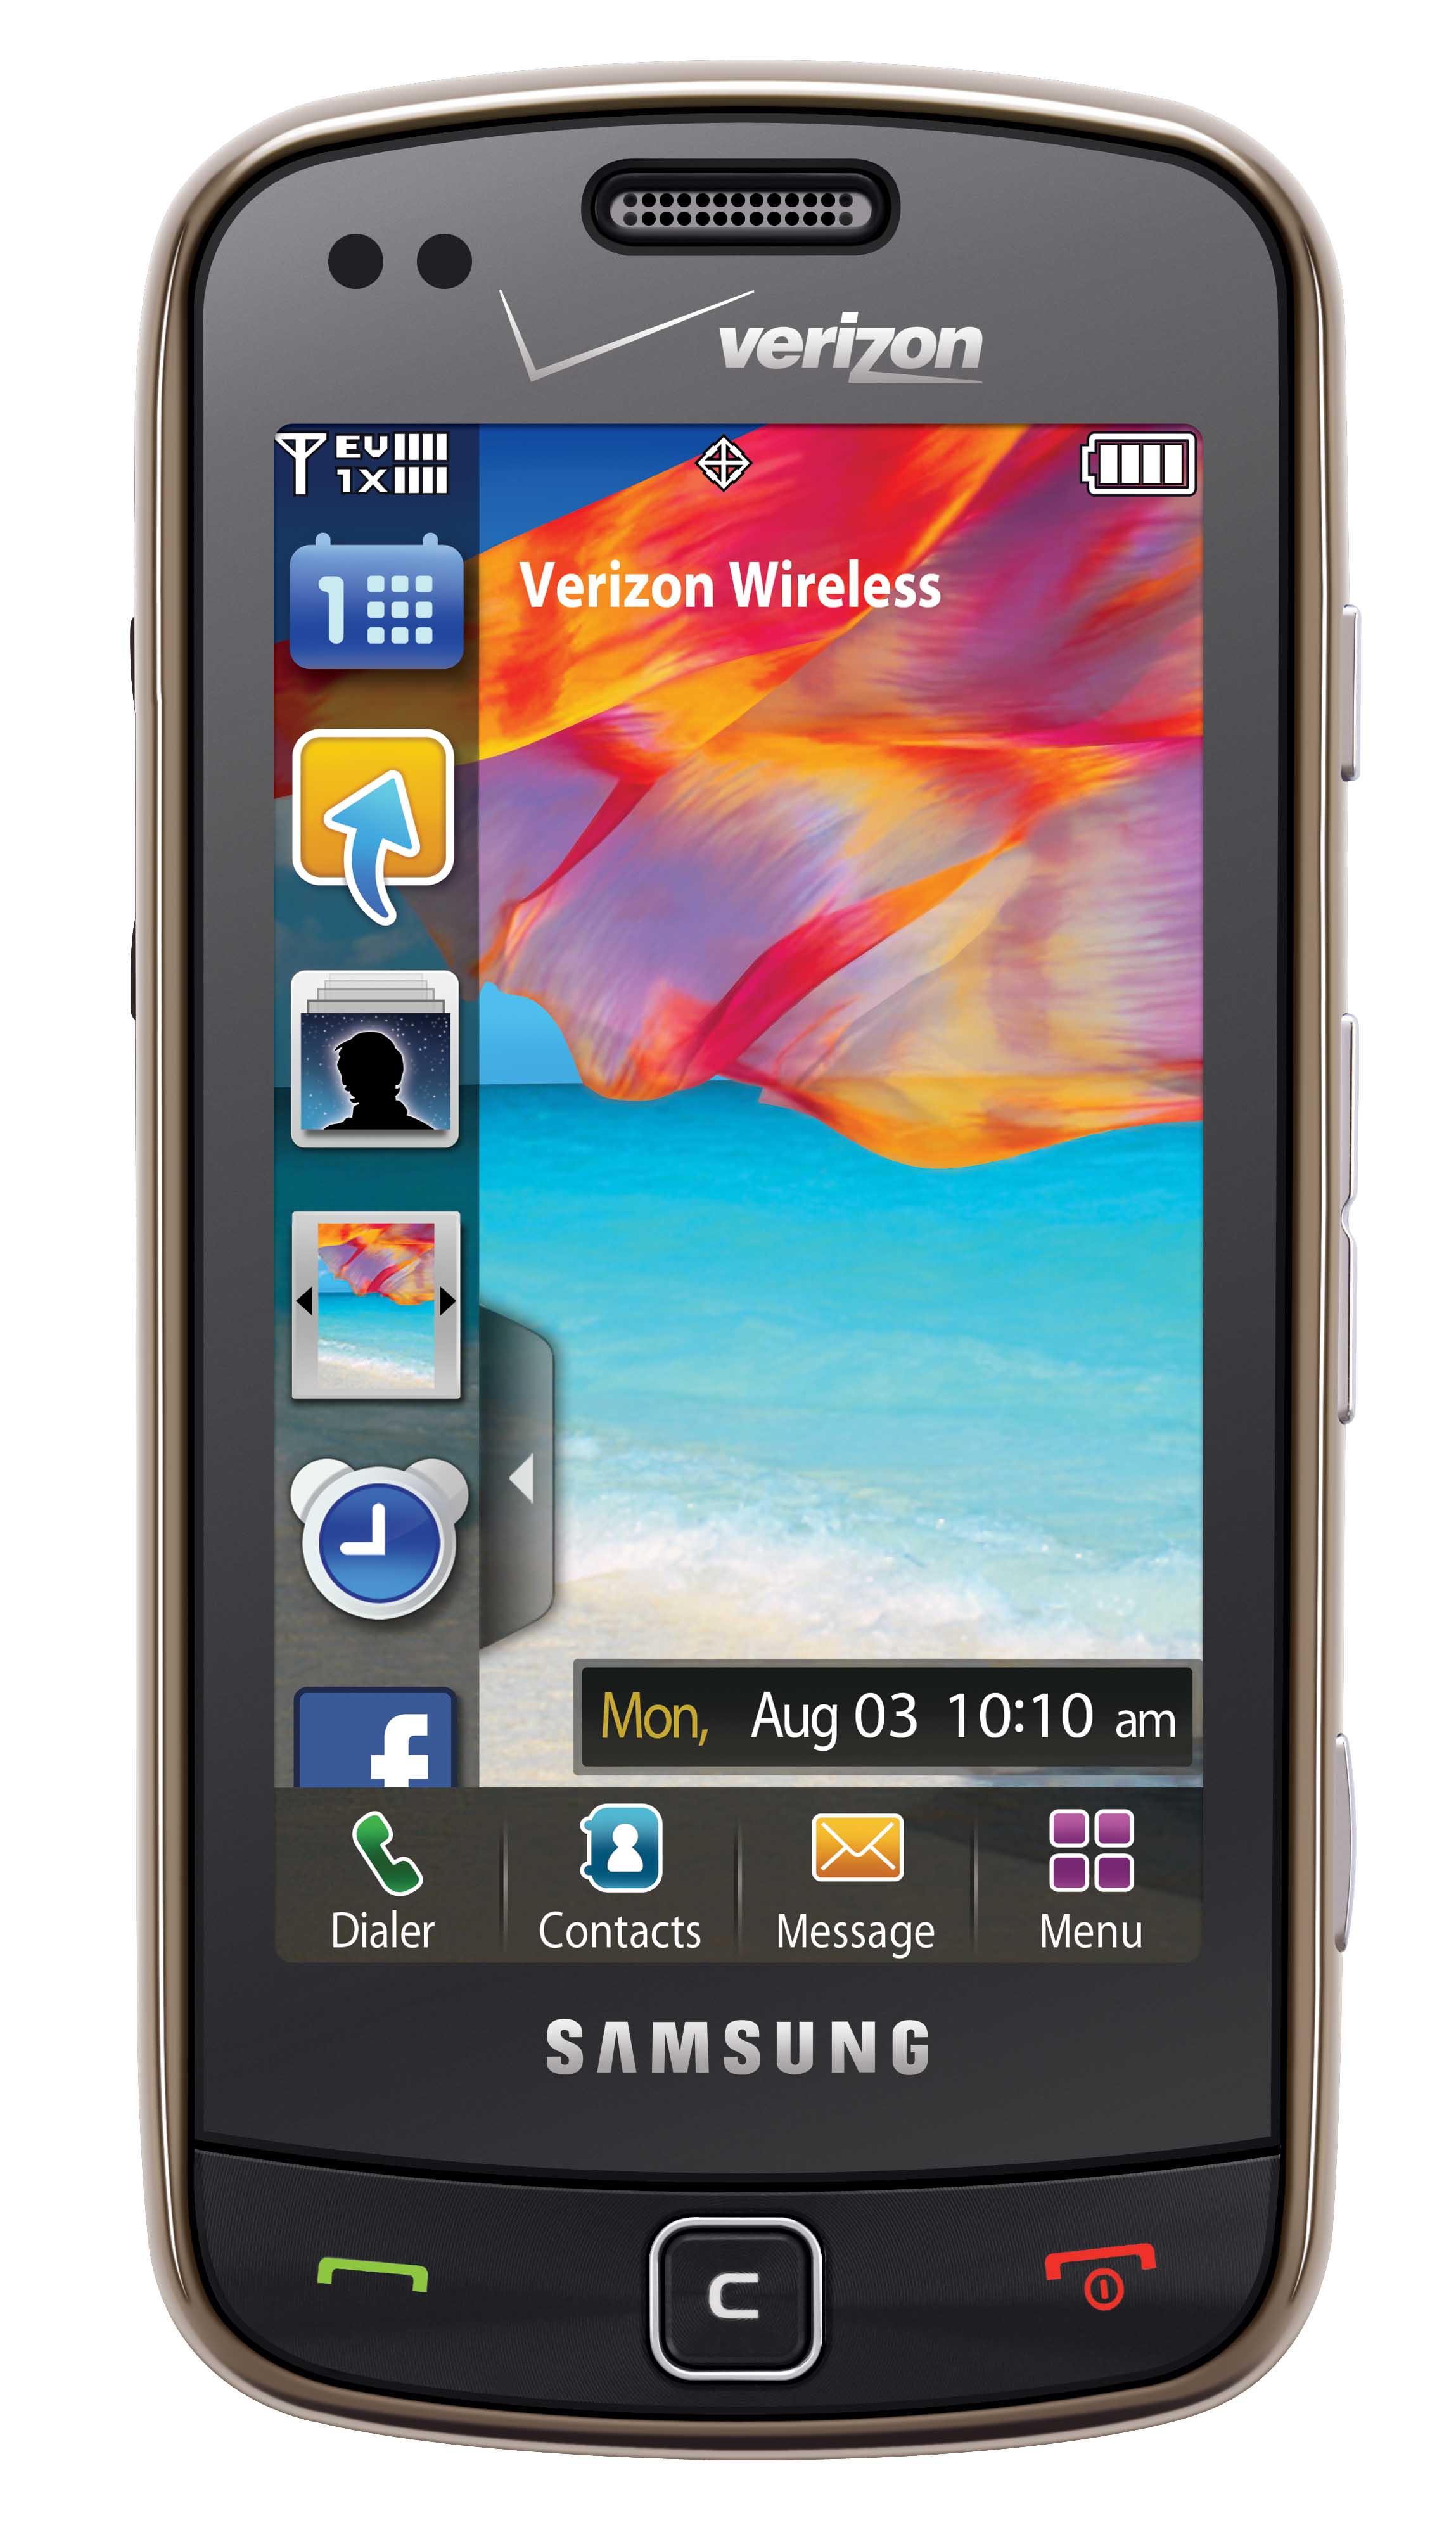 Samsung's Newest AMOLED Messaging Phone Comes to Verizon PCWorld